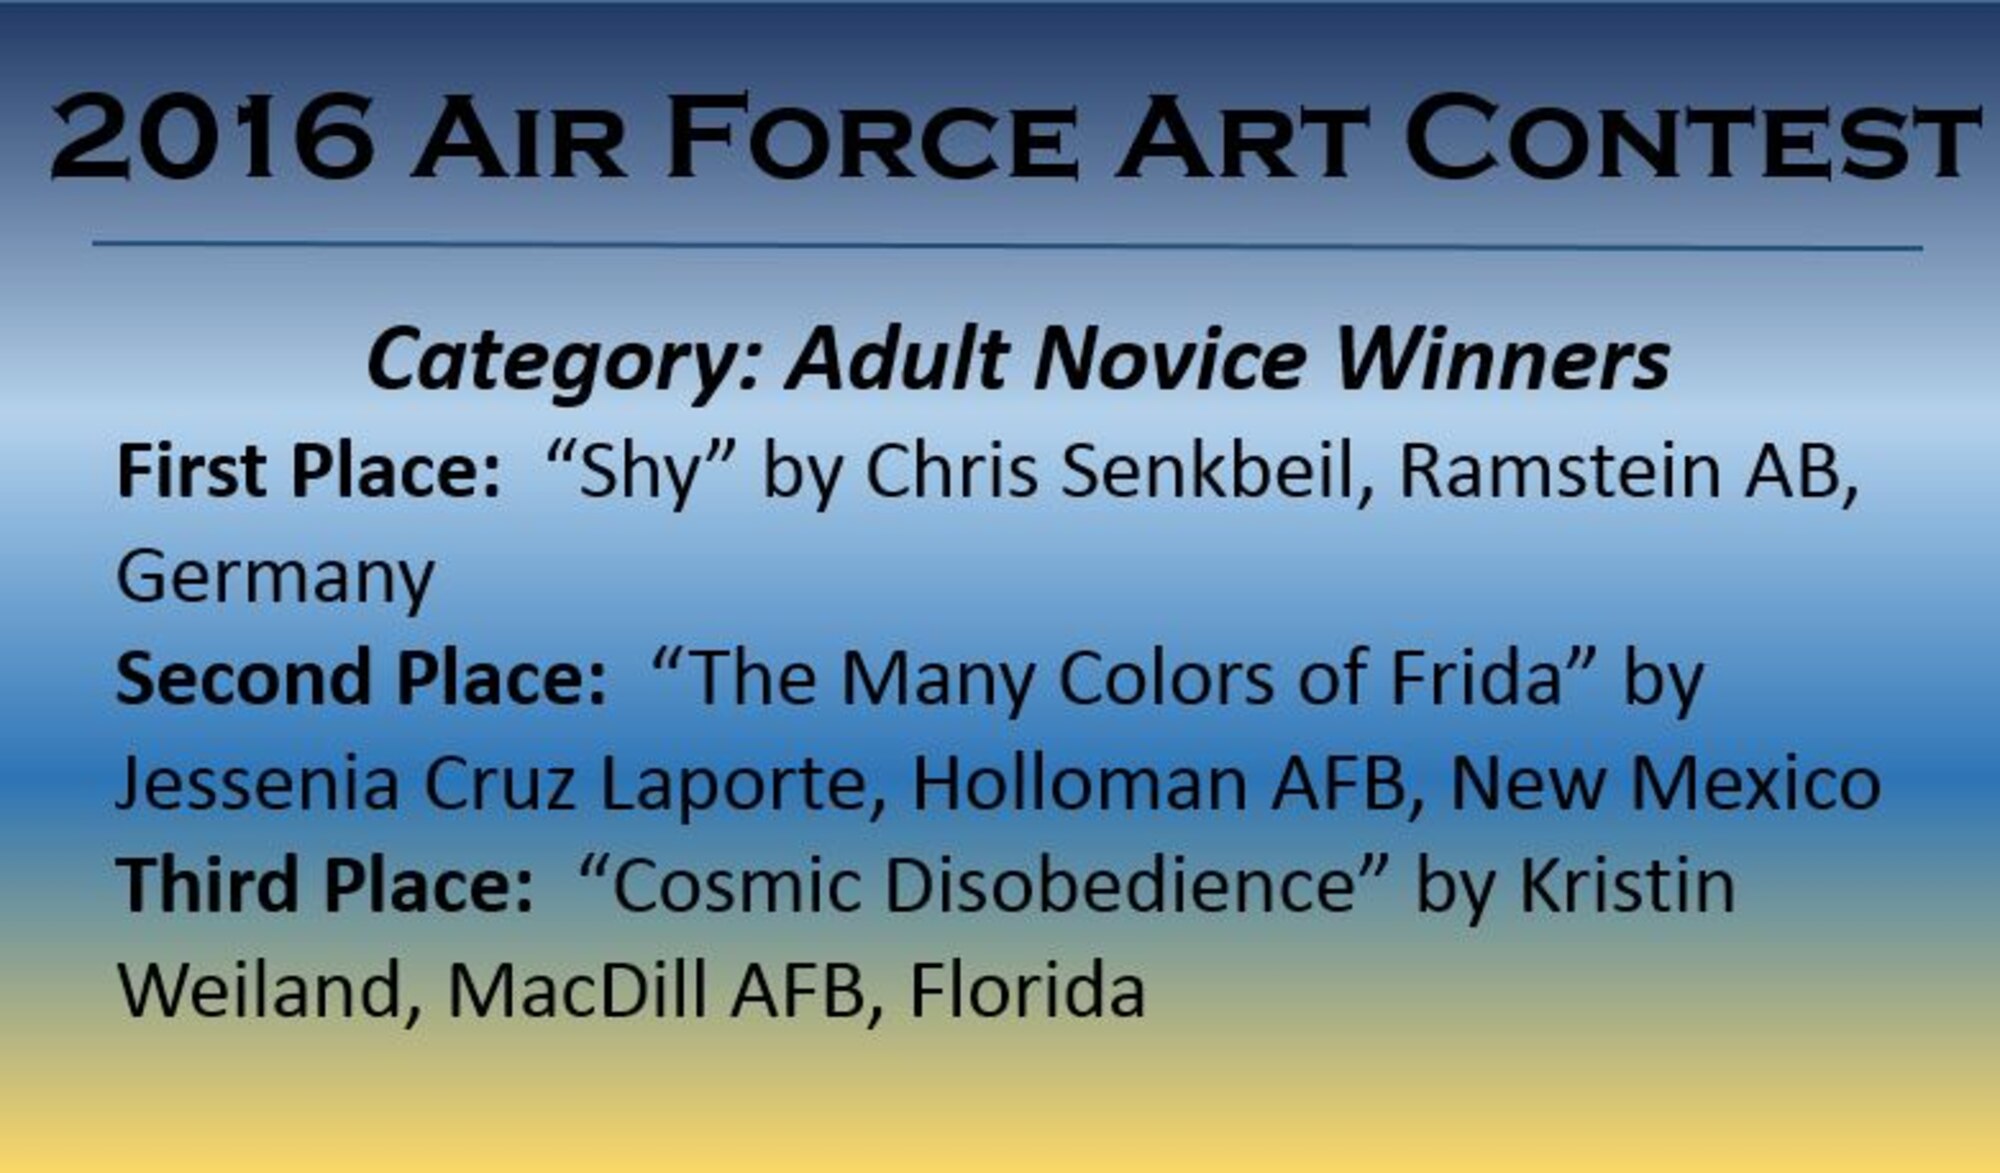 Congratulations to the 2016 Air Force Art Contest Adult Novice Winners